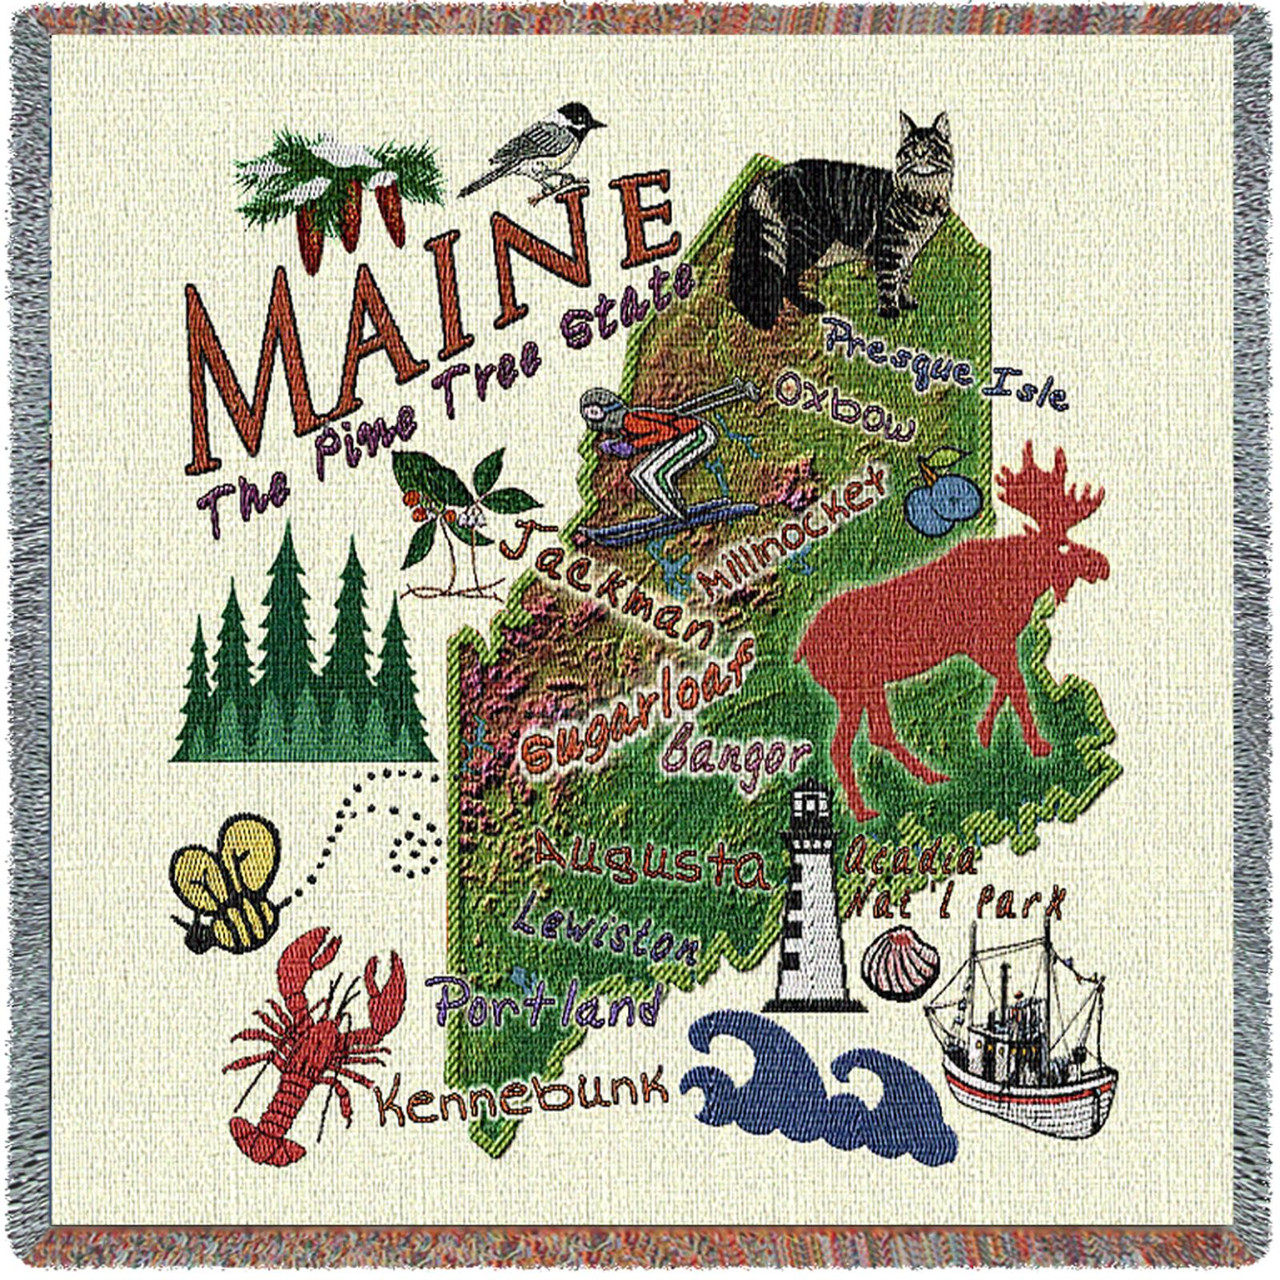 State of Maine - Lap Square Cotton Woven Blanket Throw - Made in the USA  (54x54)